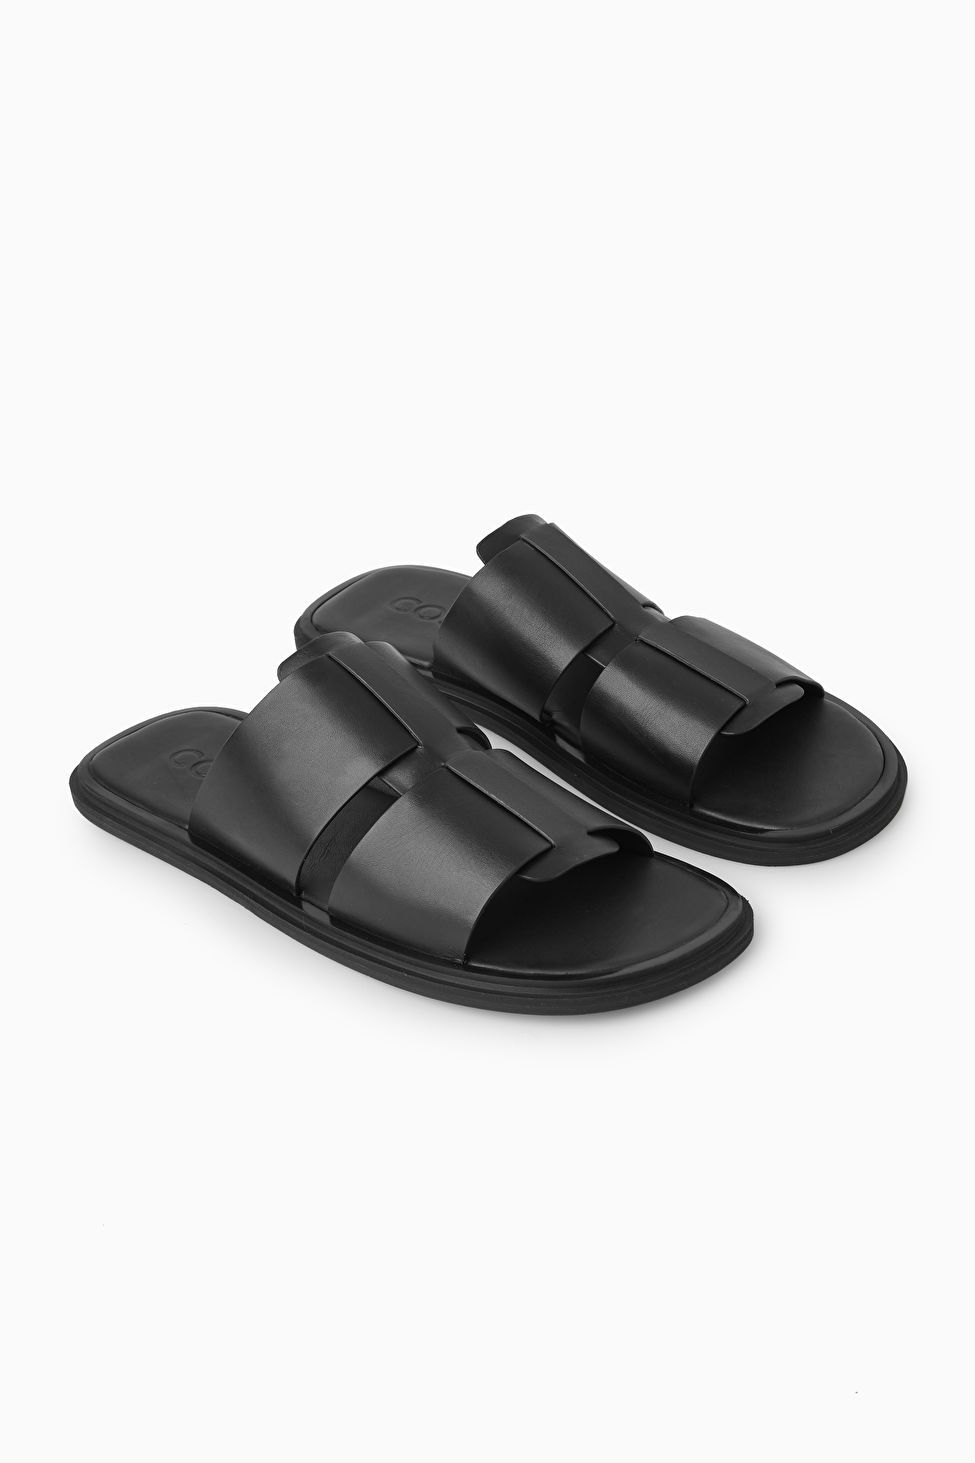 WOVEN LEATHER STRAP SANDALS - BLACK - COS | COS UK